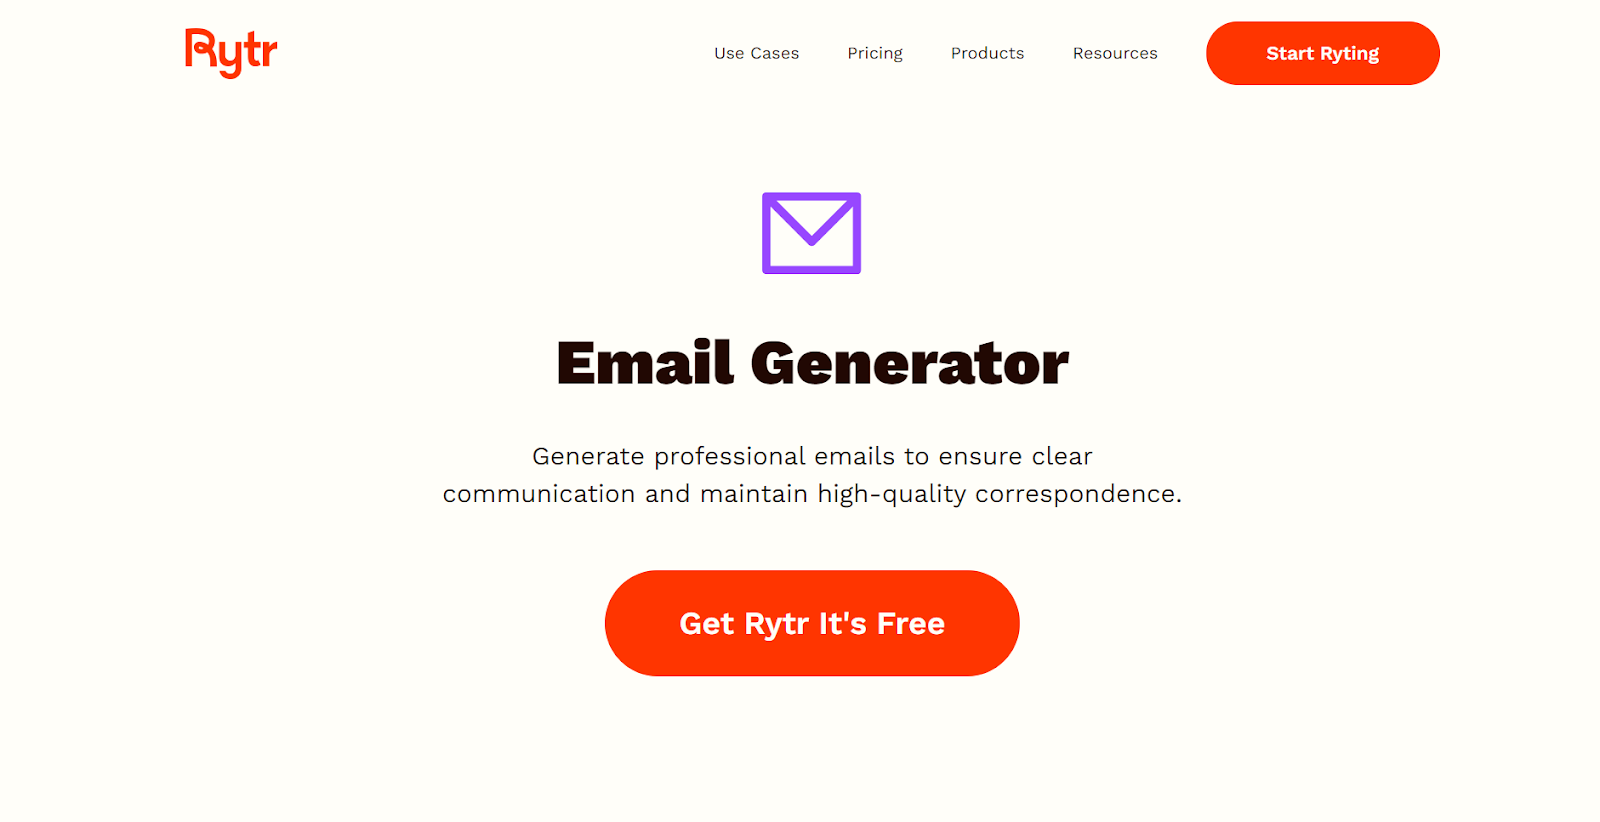 Rytr: An AI Email Generator